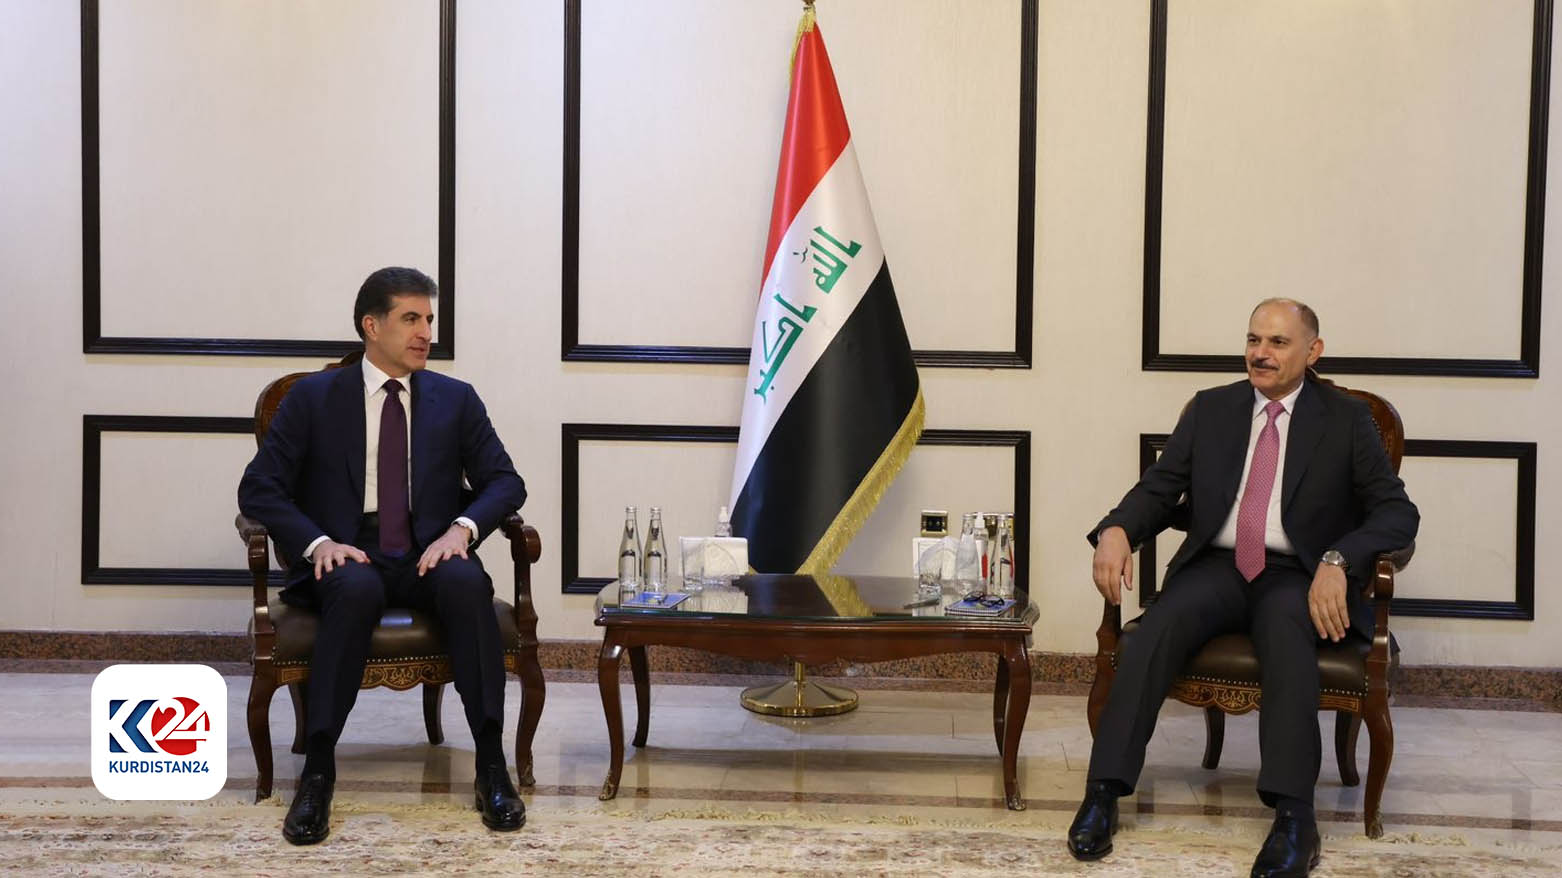 MOFA We will continue our diplomatic efforts to meet the aspirations of all Iraqis